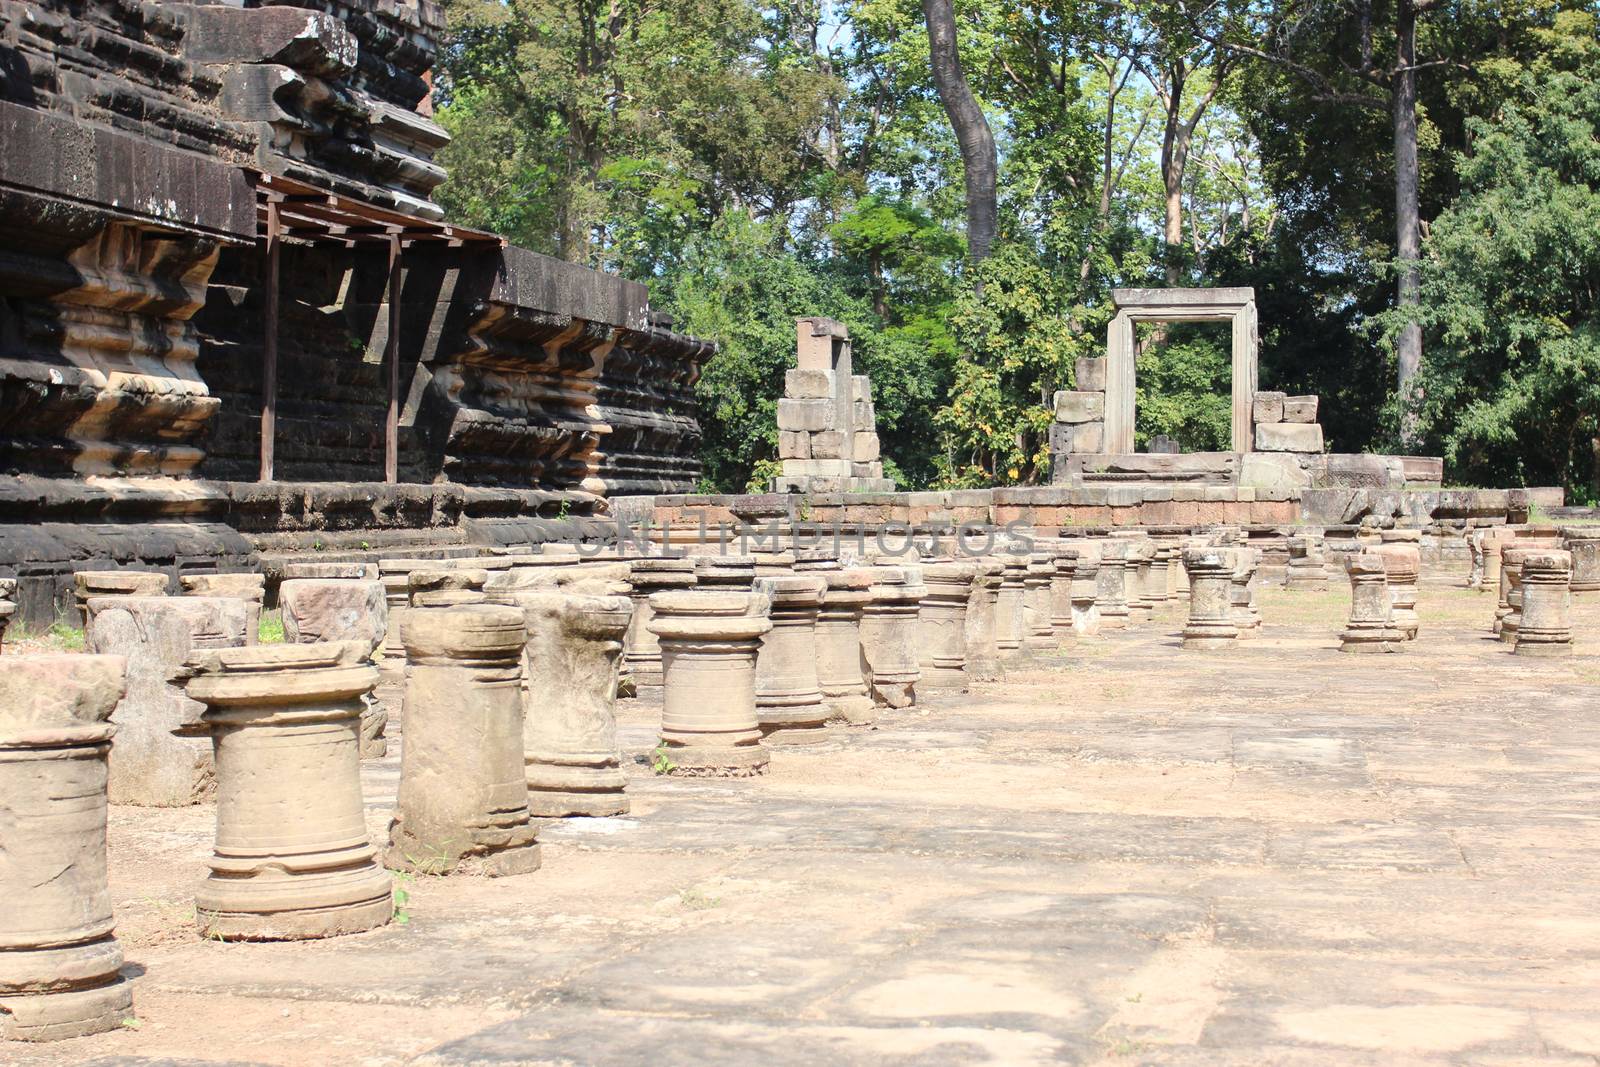 Brick and stone masonry of the ancient walls of the Cambodian temple, with reliefs and sculptures, pillars and columns on a natural background